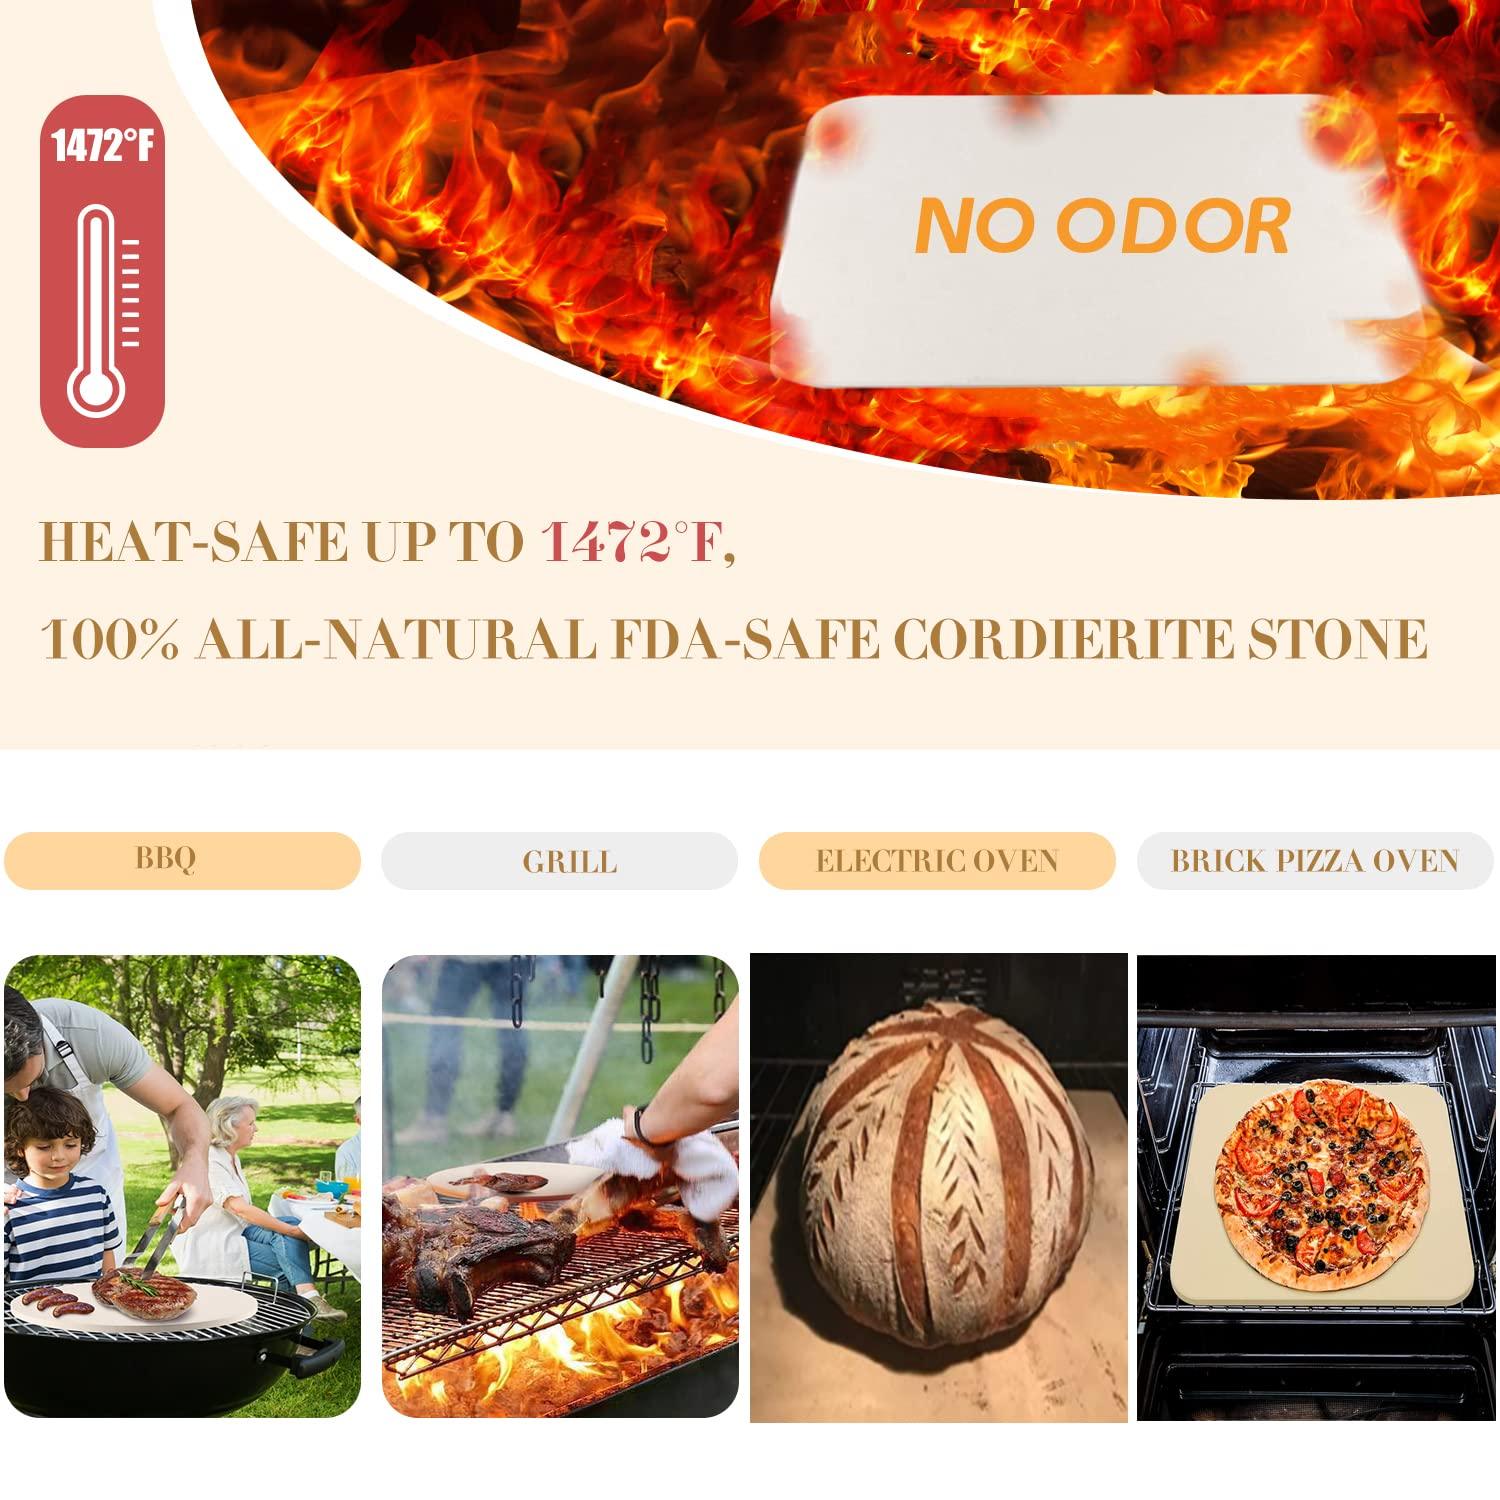 4 PCS Rectangle Pizza Stone Set, 15" Large Pizza Stone for Oven and Grill with Pizza Peel(OAK), Pizza Cutter & 10pcs Cooking Paper for Free, Baking Stone for Pizza, Bread,BBQ - CookCave